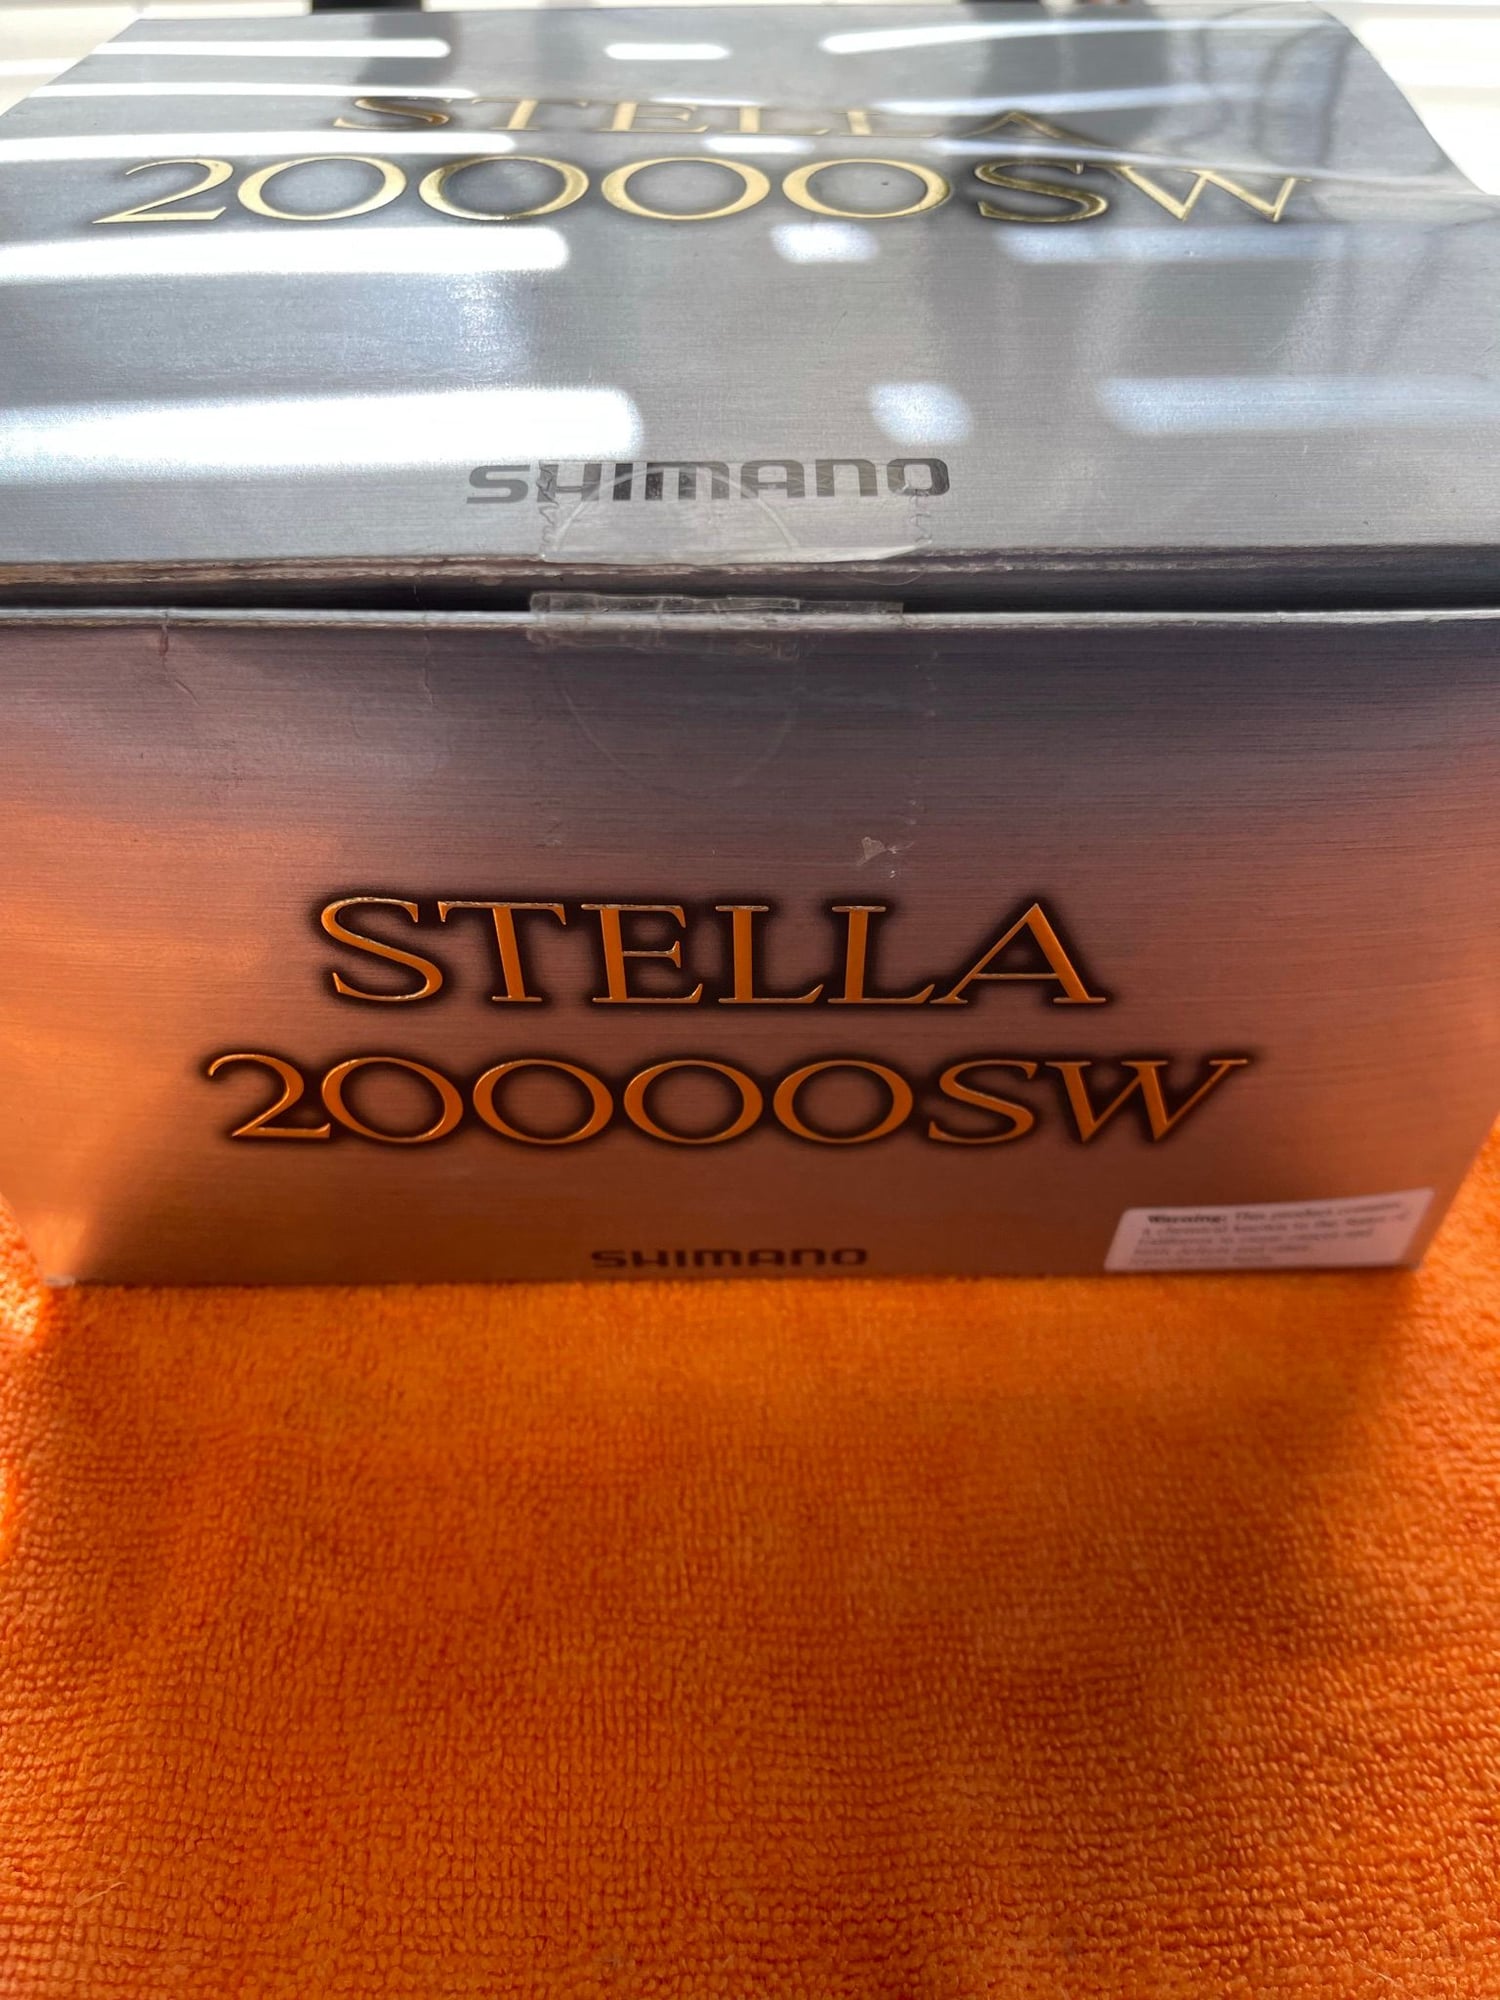 Shimano Stella 20000SW Reel - BRAND NEW IN BOX, NEVER USED - The